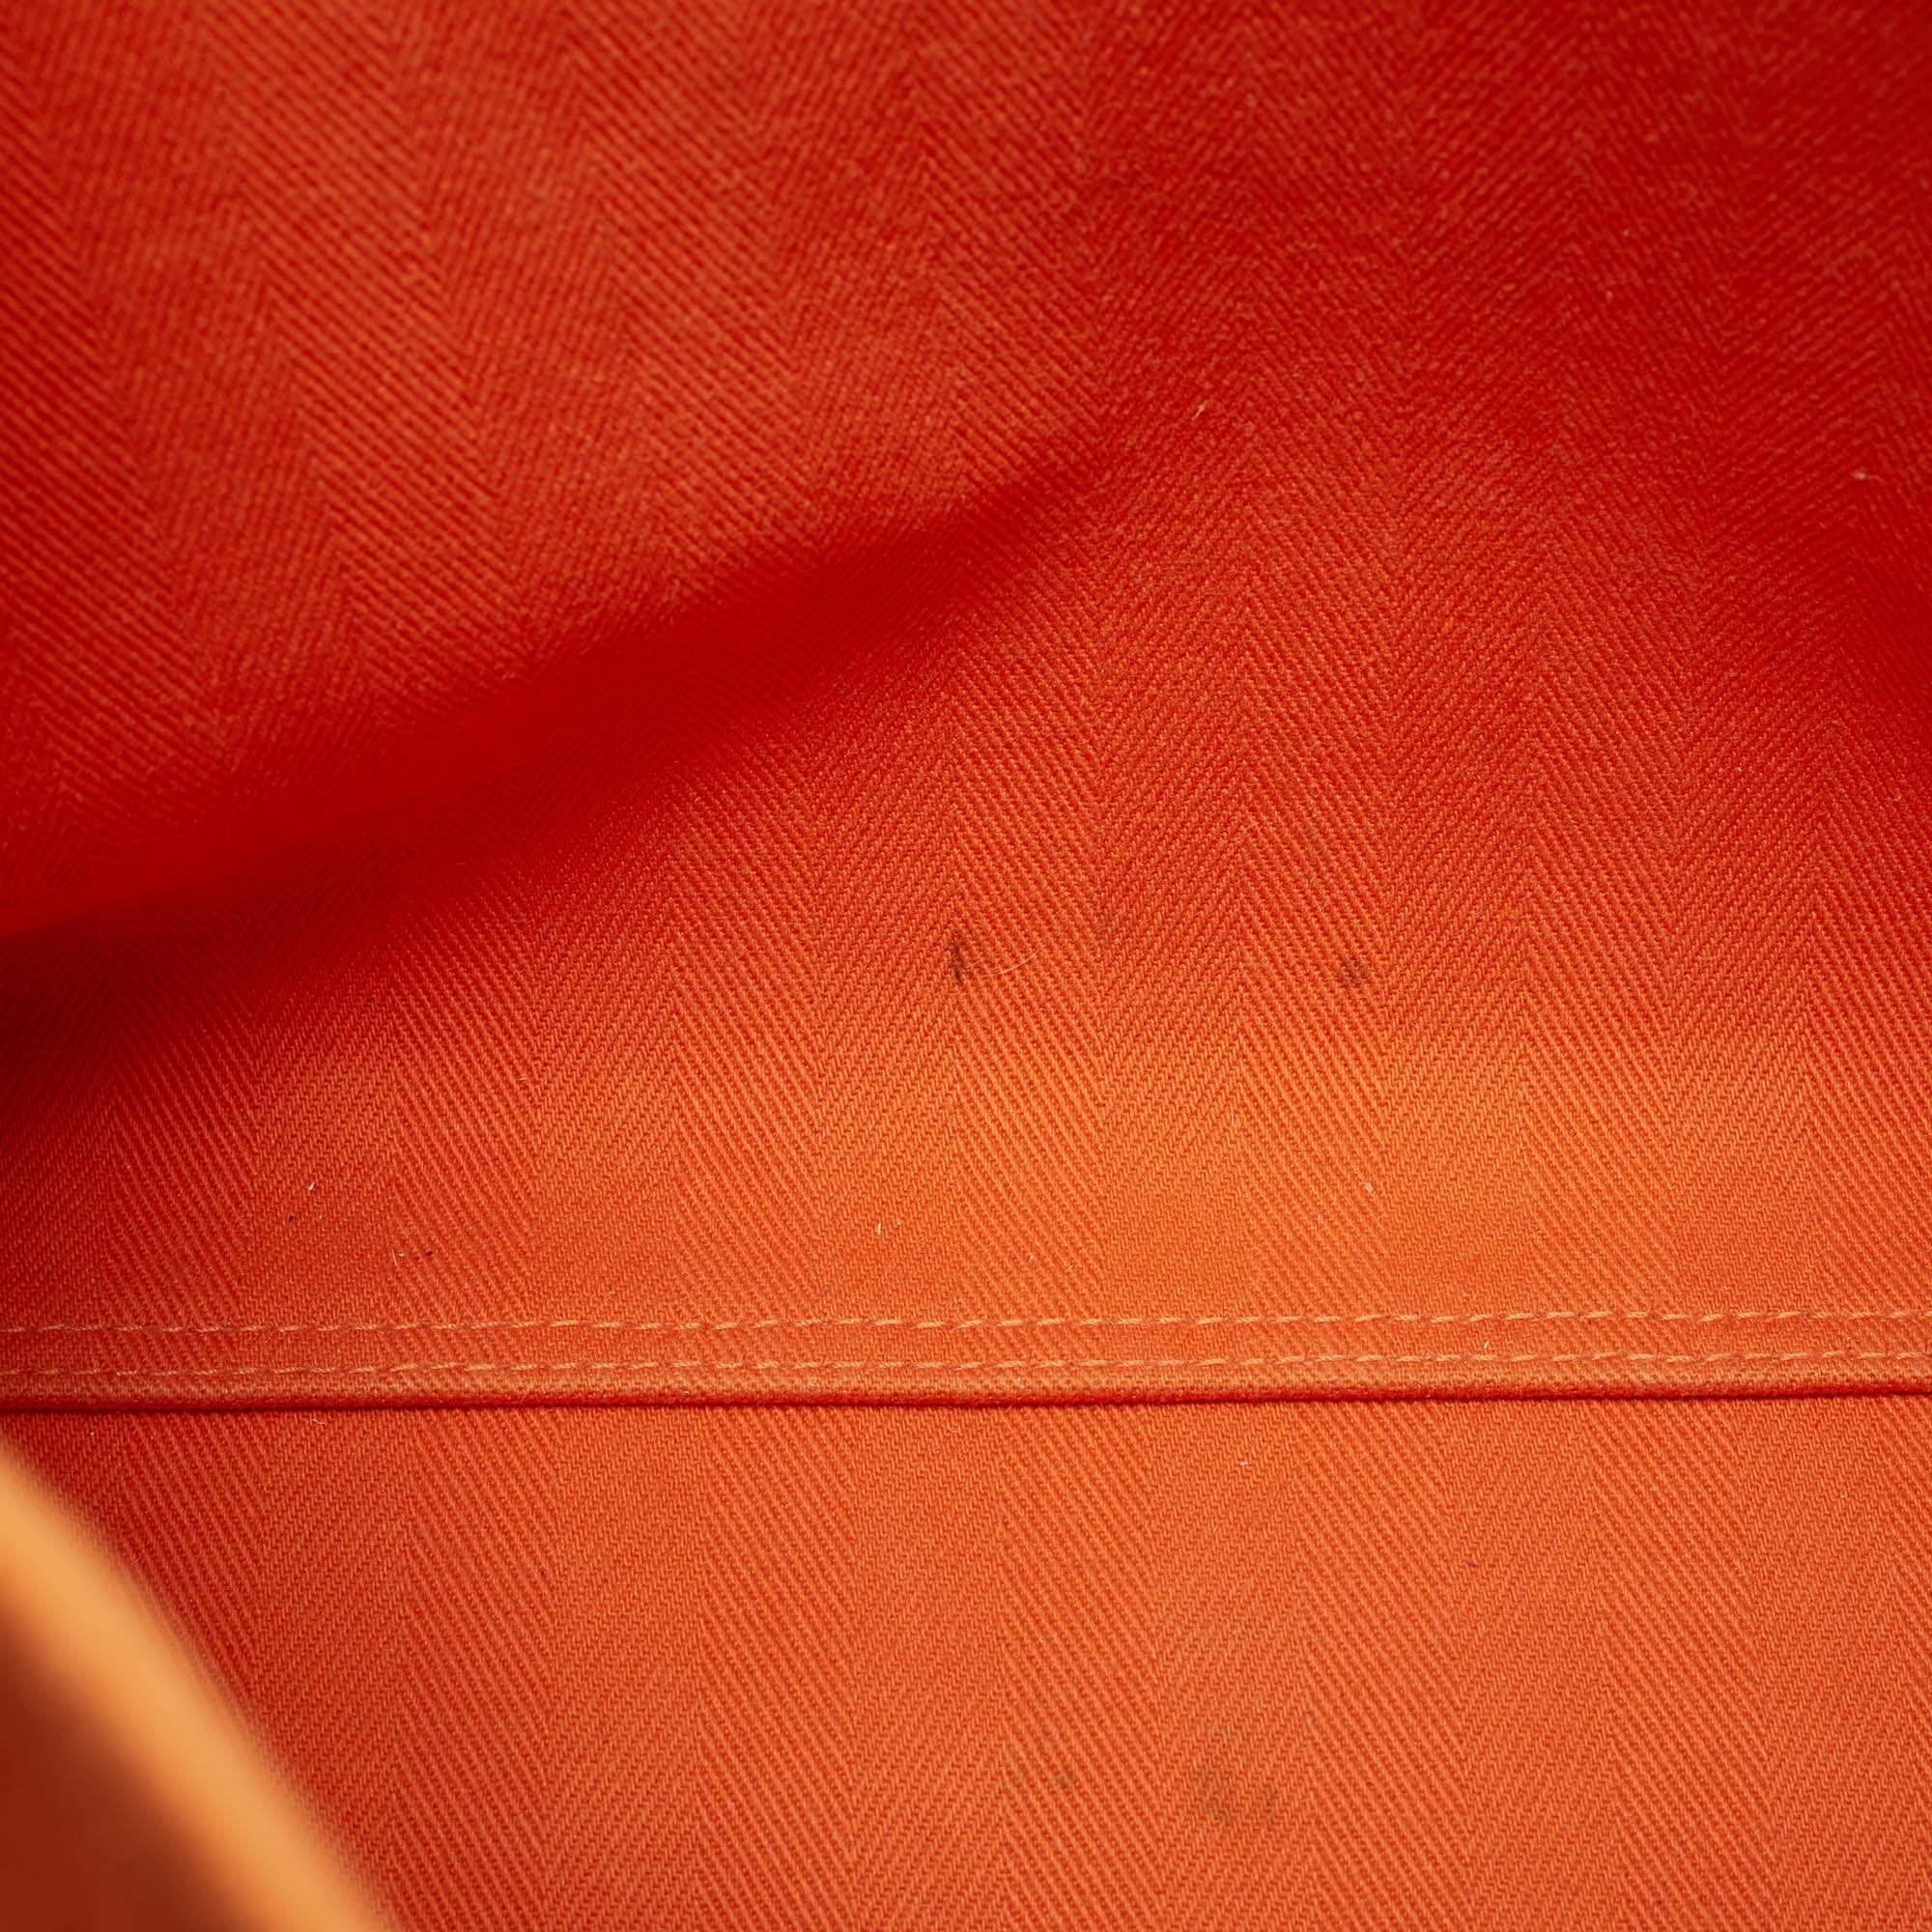 Hermes Orange/Natural Canvas and Leather Cabalicol Bag 5